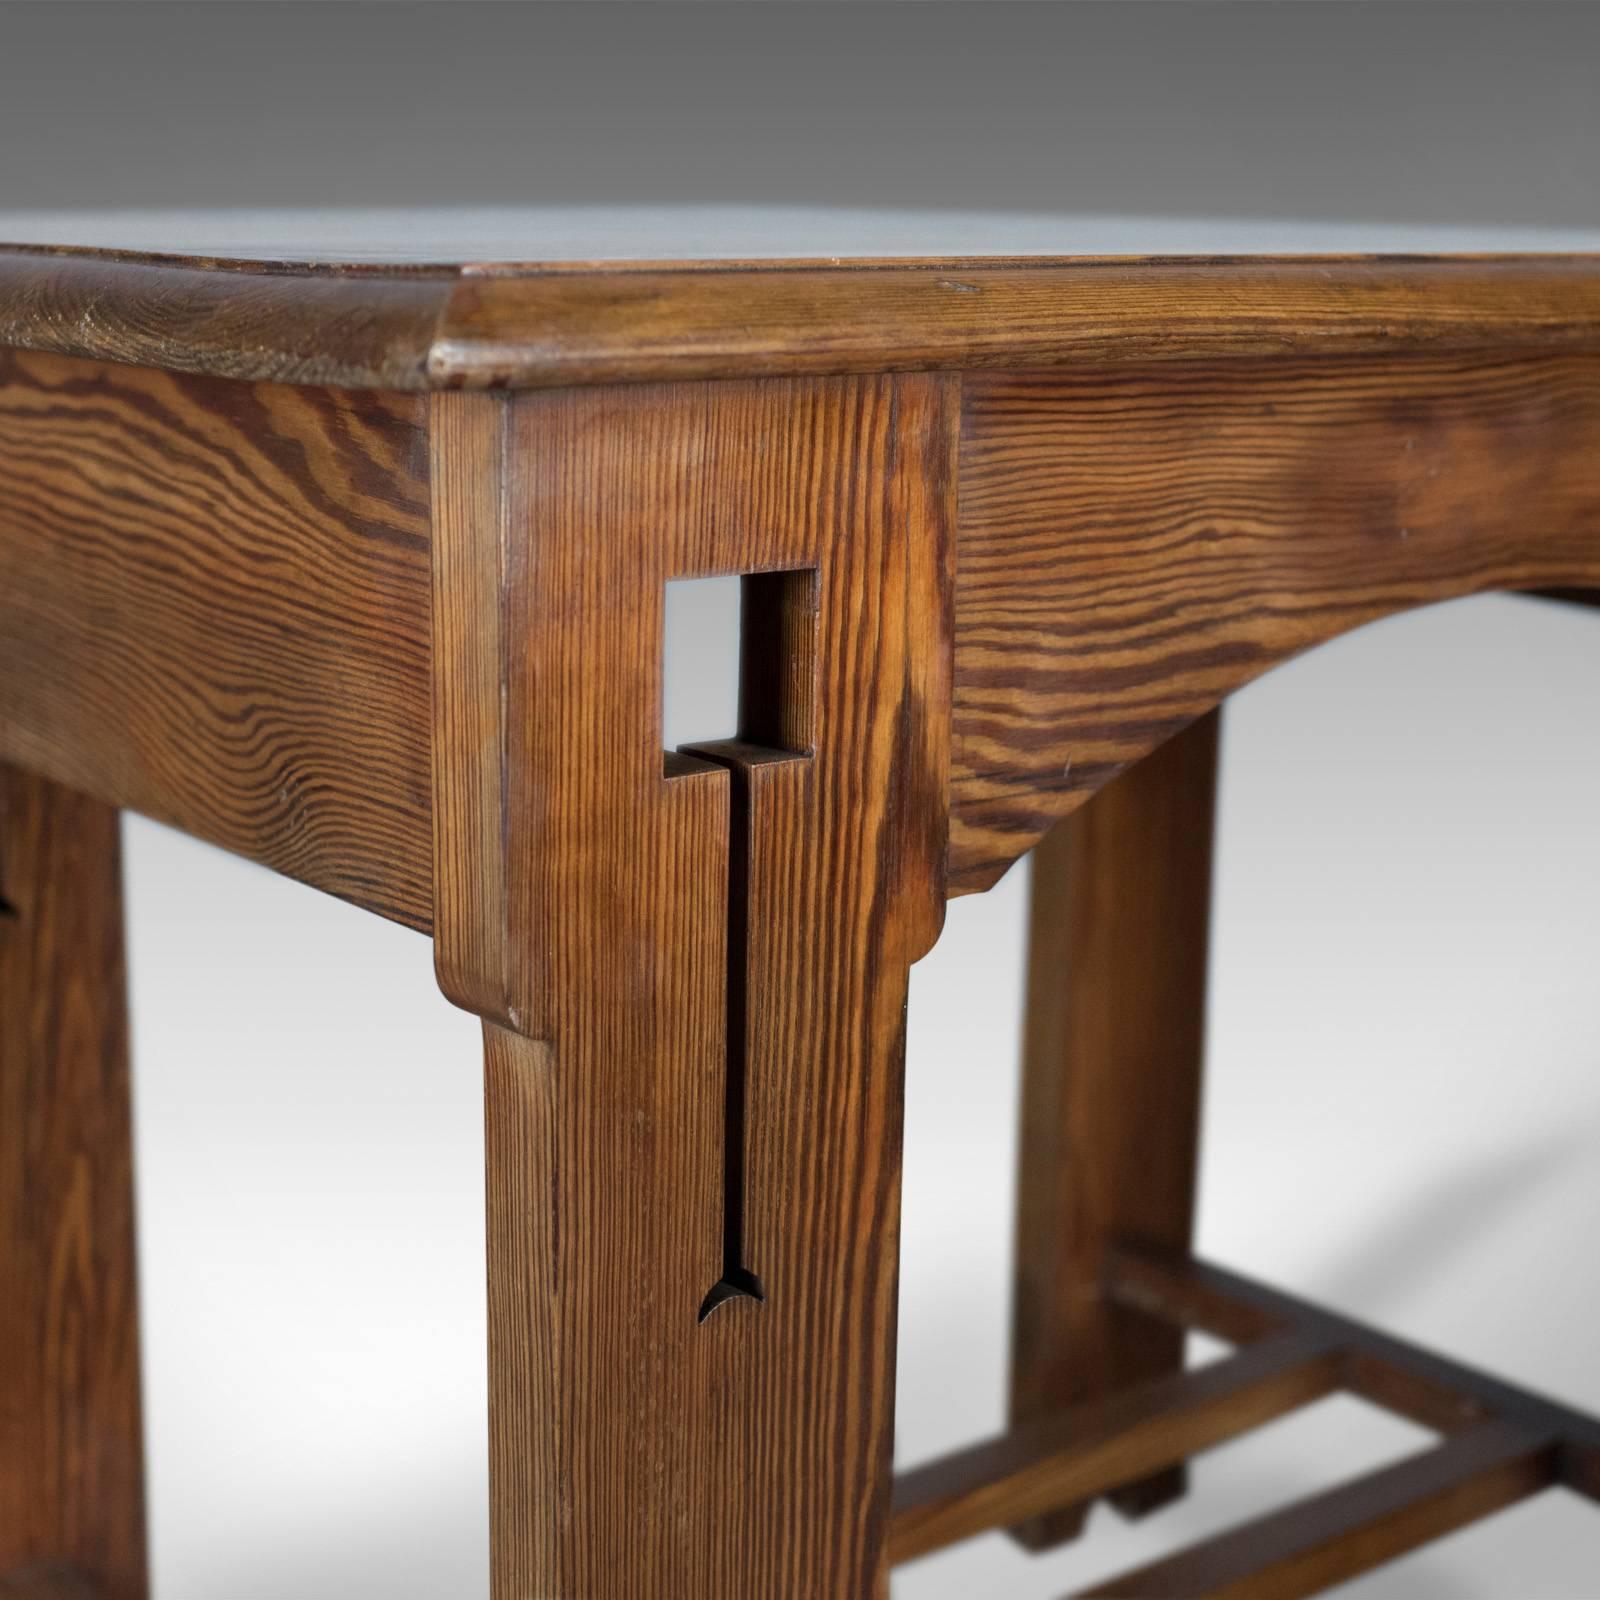 Arts and Crafts Antique Console Table, English, Arts & Crafts, Victorian, Pine, Side, circa 1880